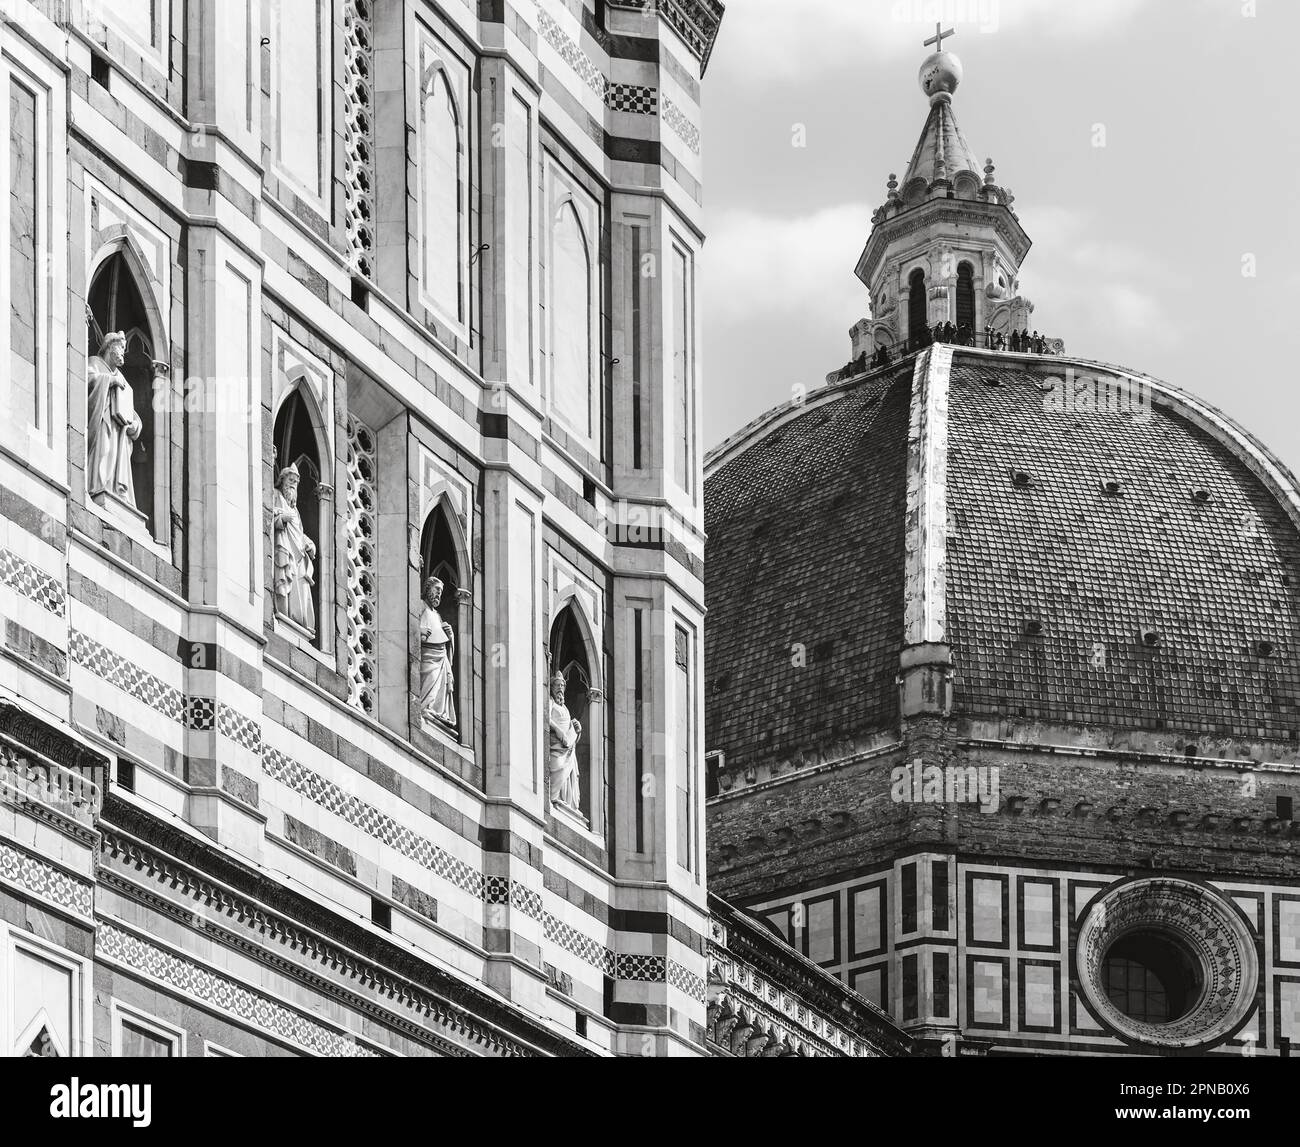 Filippo Brunelleschi's dome of the Duomo, or cathedral, seen beside part of the The Campanile or belltower. Florence, Tuscany, Italy.  The historic ce Stock Photo